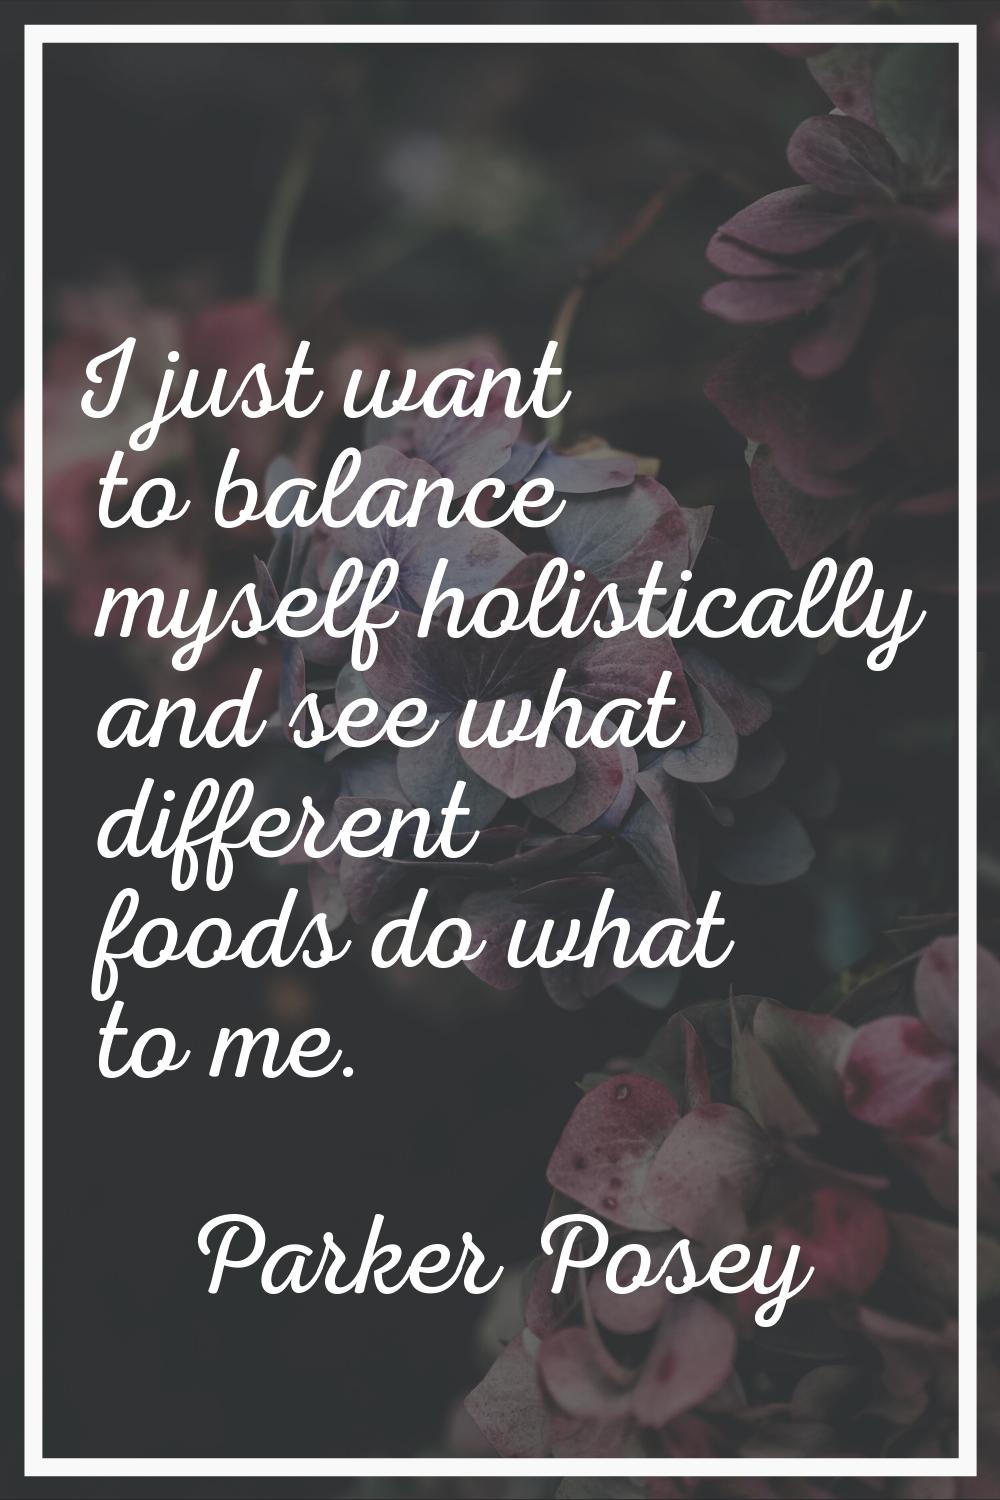 I just want to balance myself holistically and see what different foods do what to me.